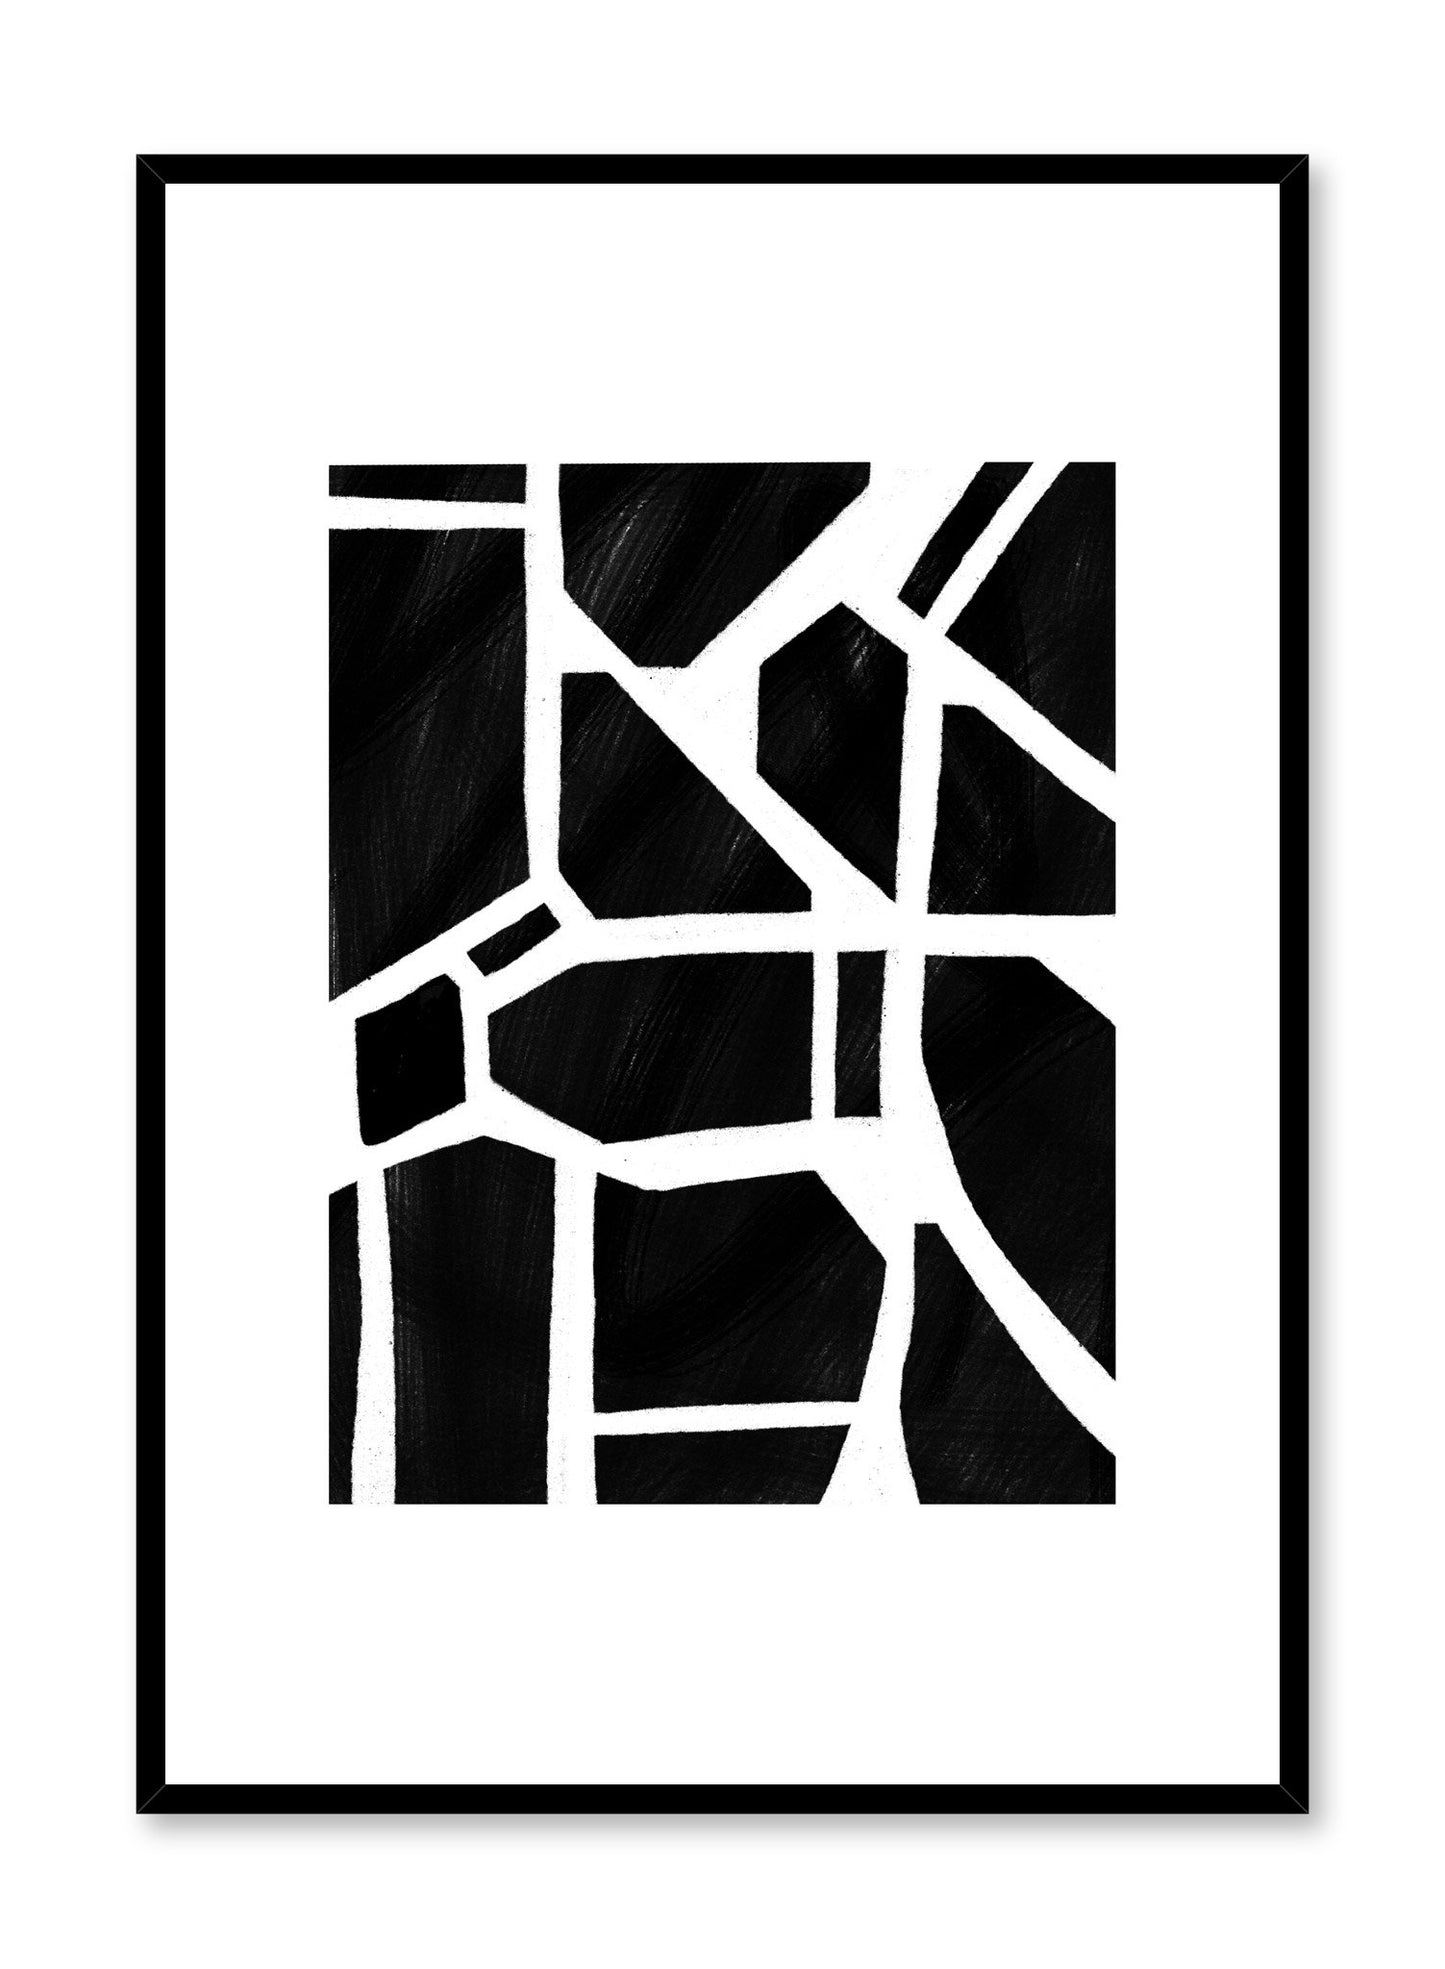 Modern minimalist poster by Opposite Wall with black and white shattered pieces abstract art